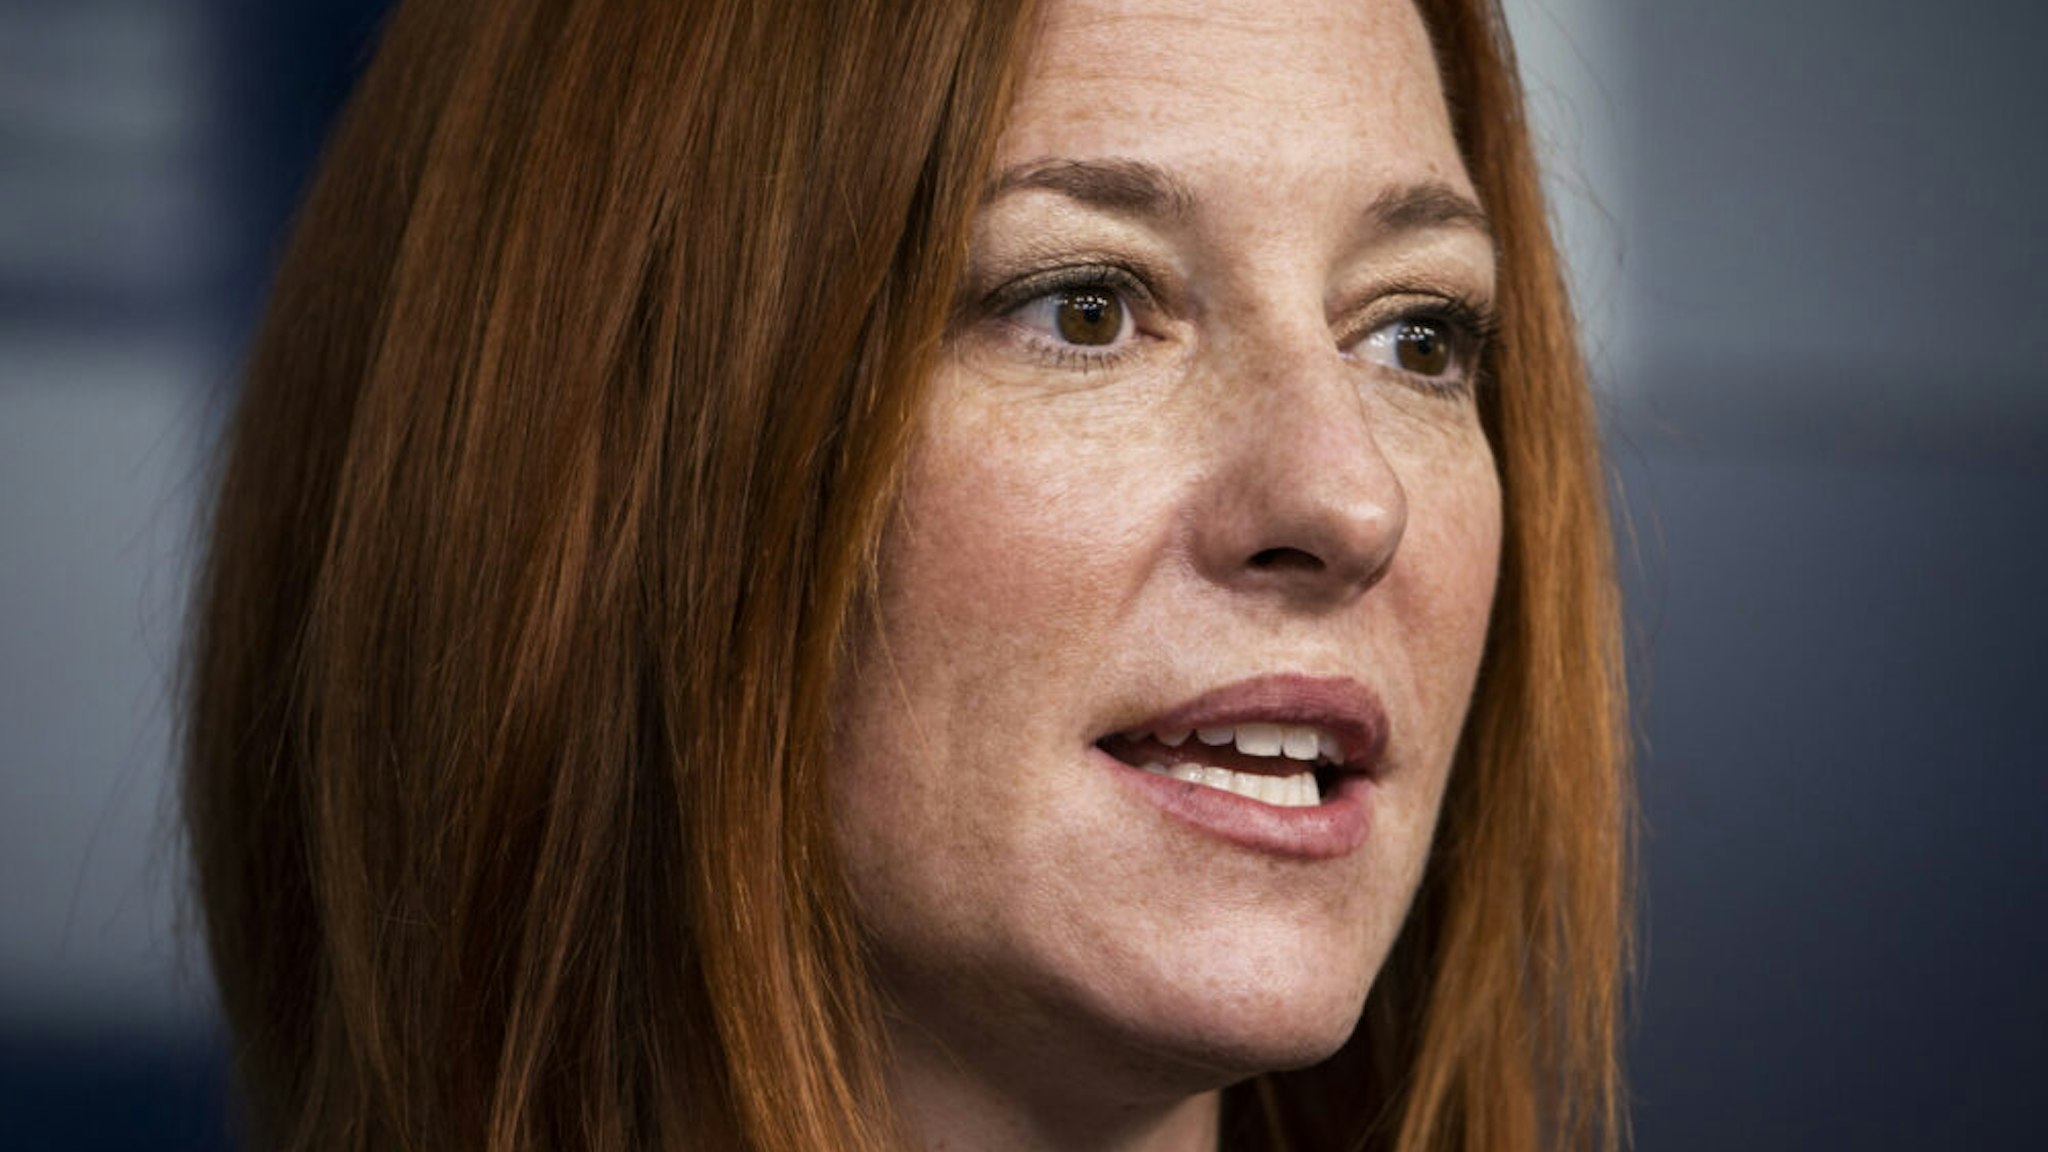 Jen Psaki, White House press secretary, speaks during a news conference in the James S. Brady Press Briefing Room at the White House in Washington, D.C., U.S., on Thursday, Feb. 4, 2021. President Joe Biden told House Democrats on Wednesday that while he was open to tightening the eligibility for his proposed $1,400 stimulus checks, any move to cut the payments' base amount would mean starting his presidency with a broken promise.